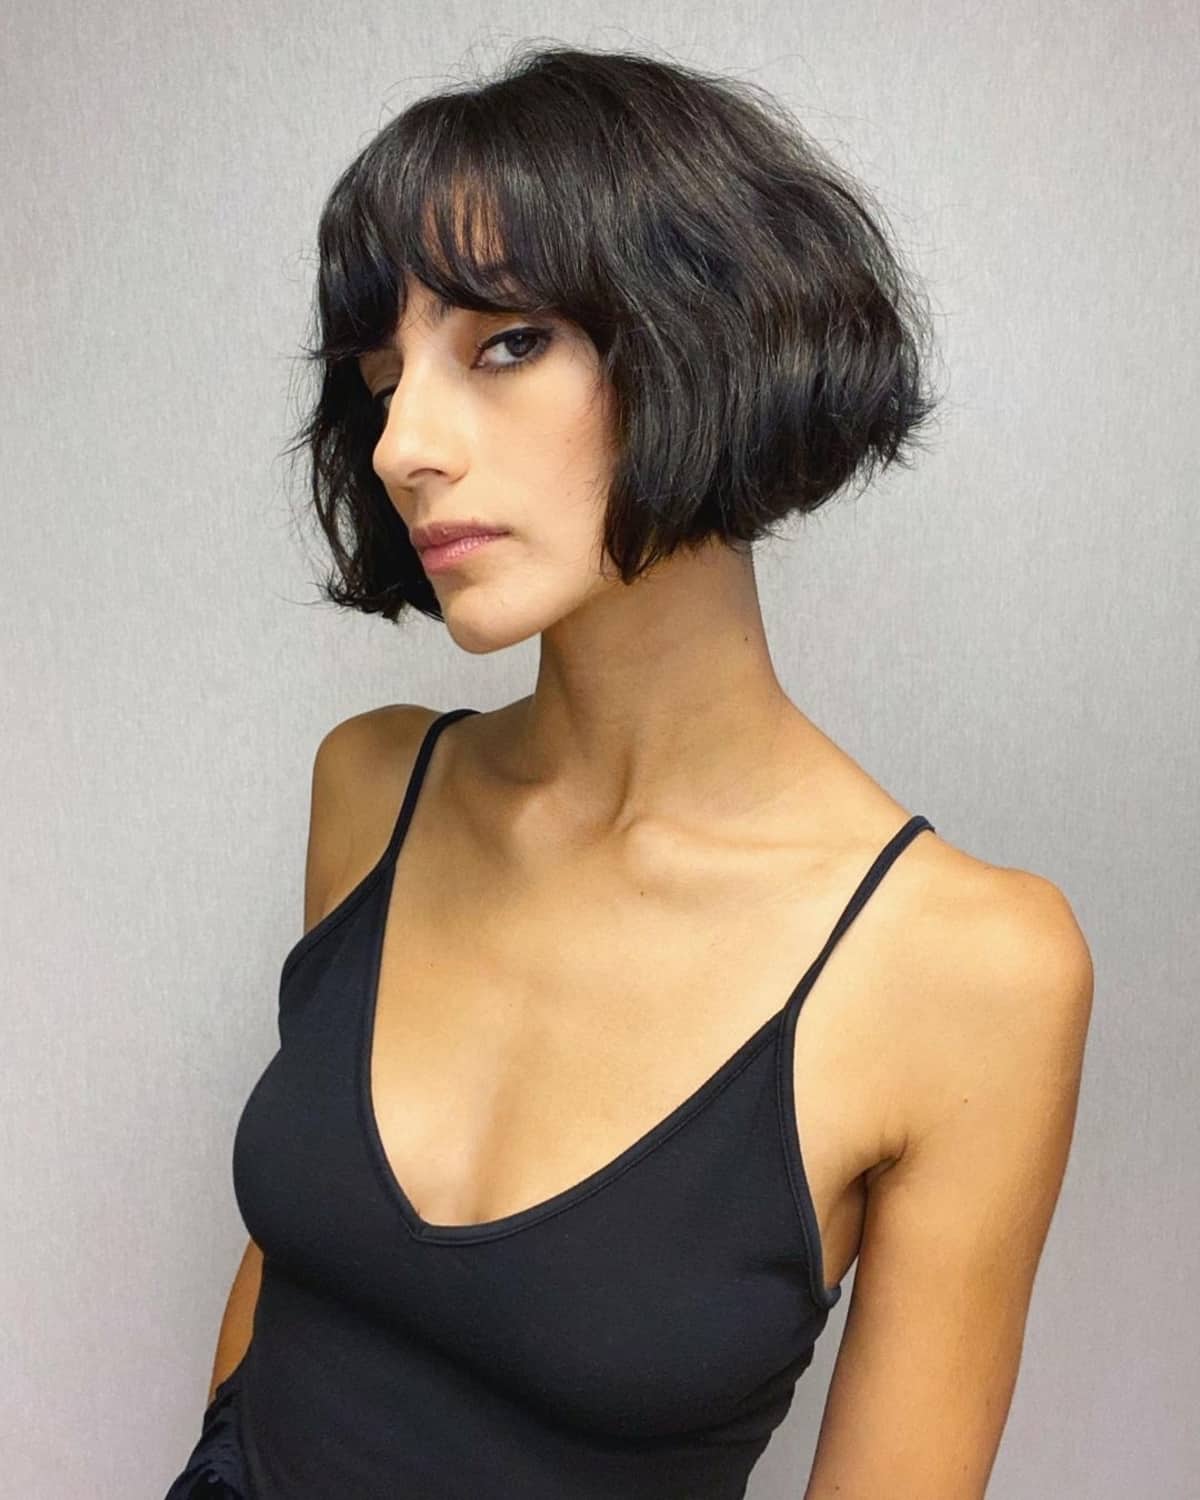 The classic French bob